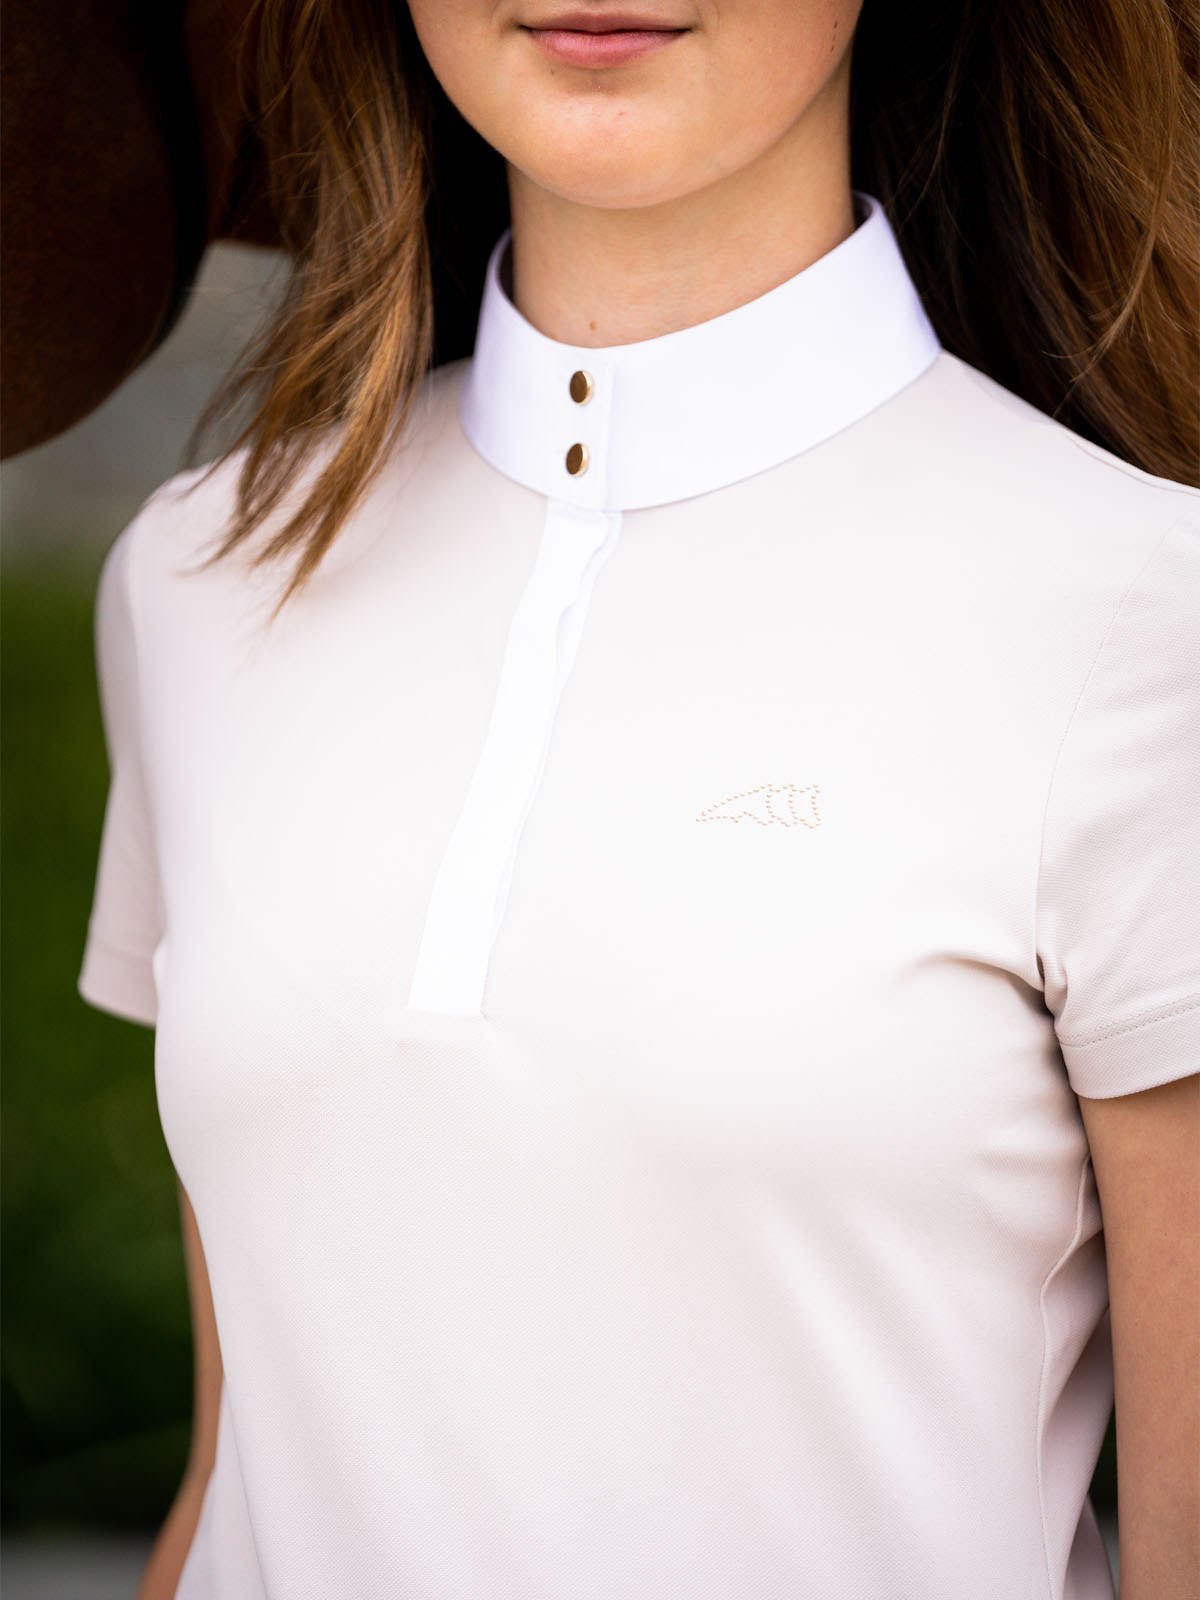 ELIZZYE Short sleeve WOMEN'S COMPETITION POLO SHIRT - front side